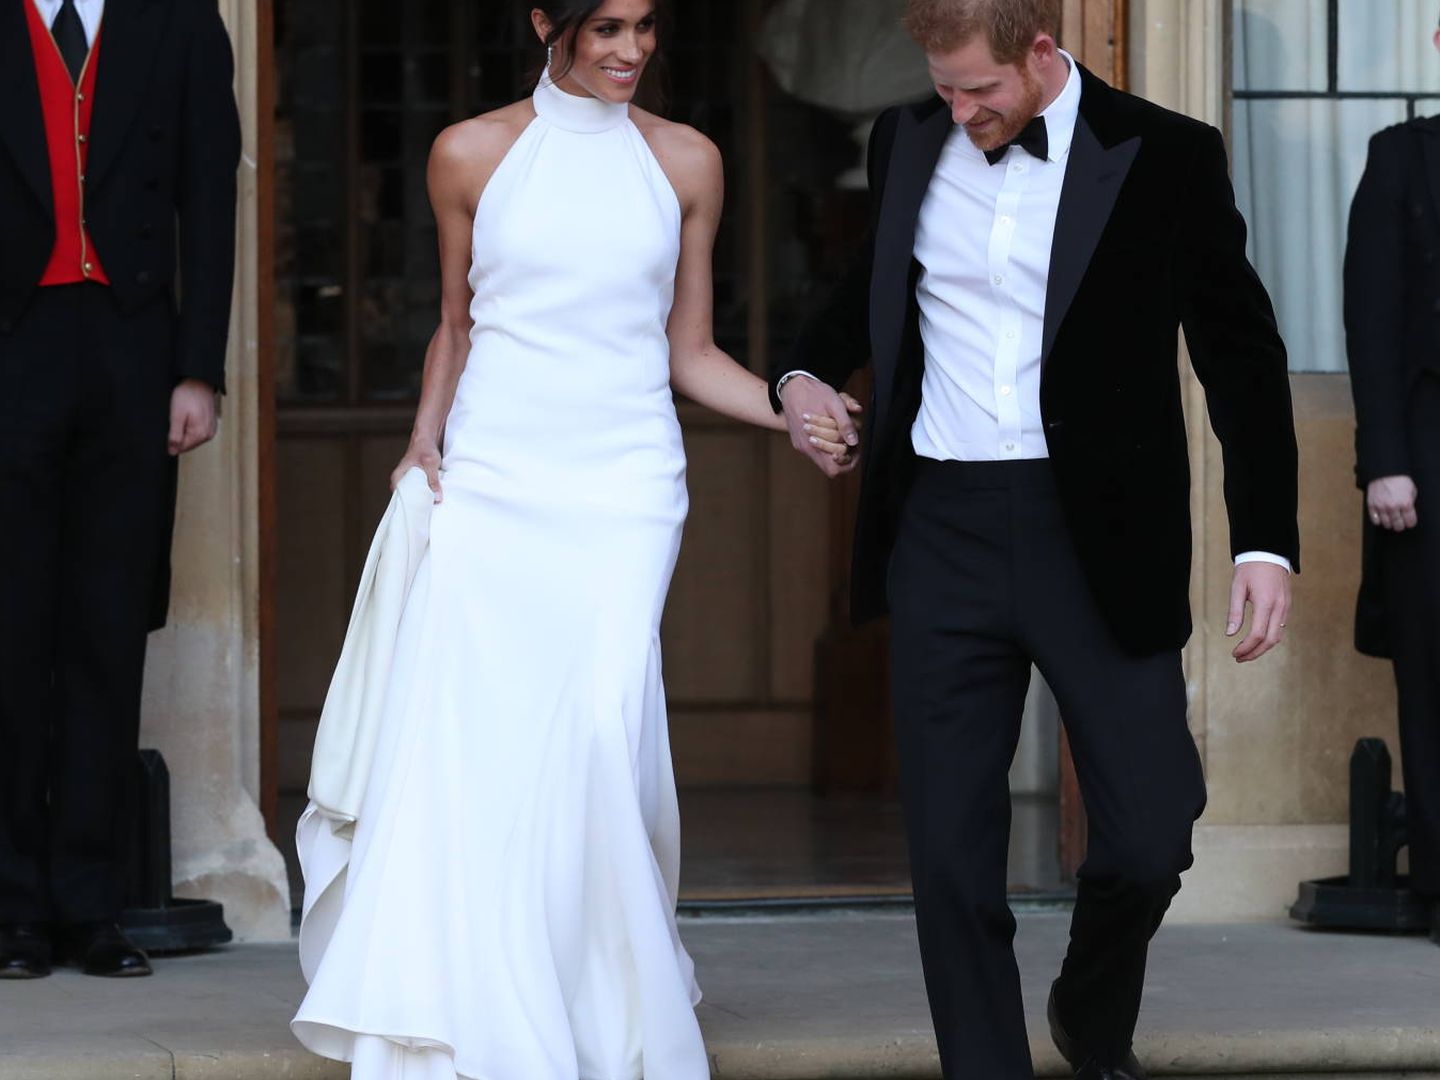 WINDSOR, UNITED KINGDOM - MAY 19: Duchess of Sussex and Prince Harry, Duke of Sussex leave Windsor Castle after their wedding to attend an evening reception at Frogmore House, hosted by the Prince of Wales on May 19, 2018 in Windsor, England. (Photo by Steve Parsons - WPA Pool/Getty Images)